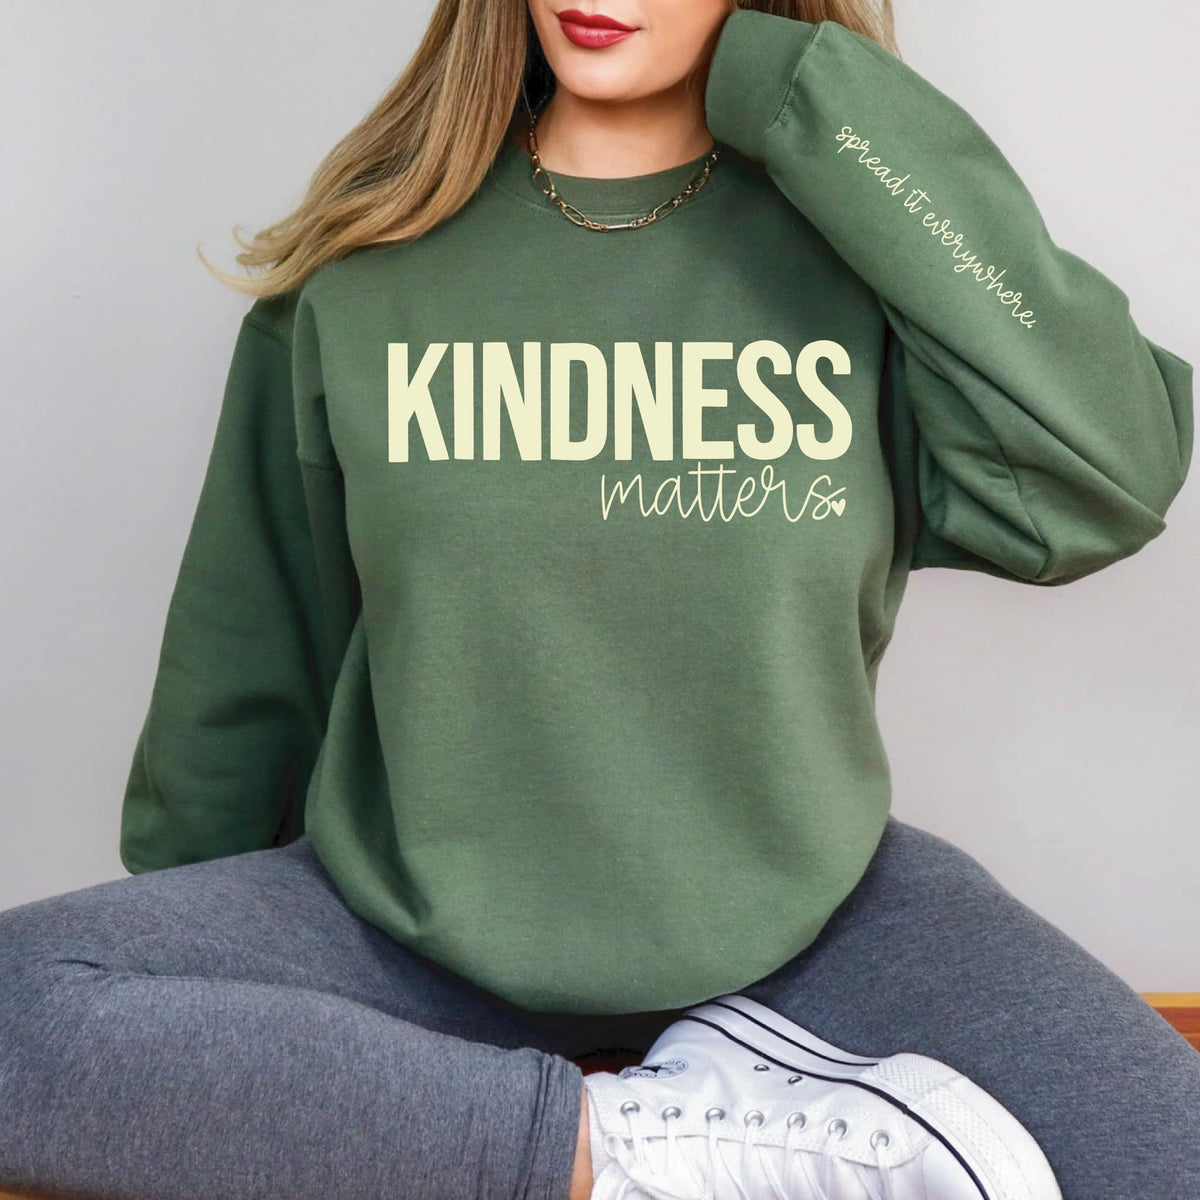 Kindness Matters Spread It Everywhere Sweatshirt -  ALLOW 7 DAYS TO SHIP + SHIP TIME